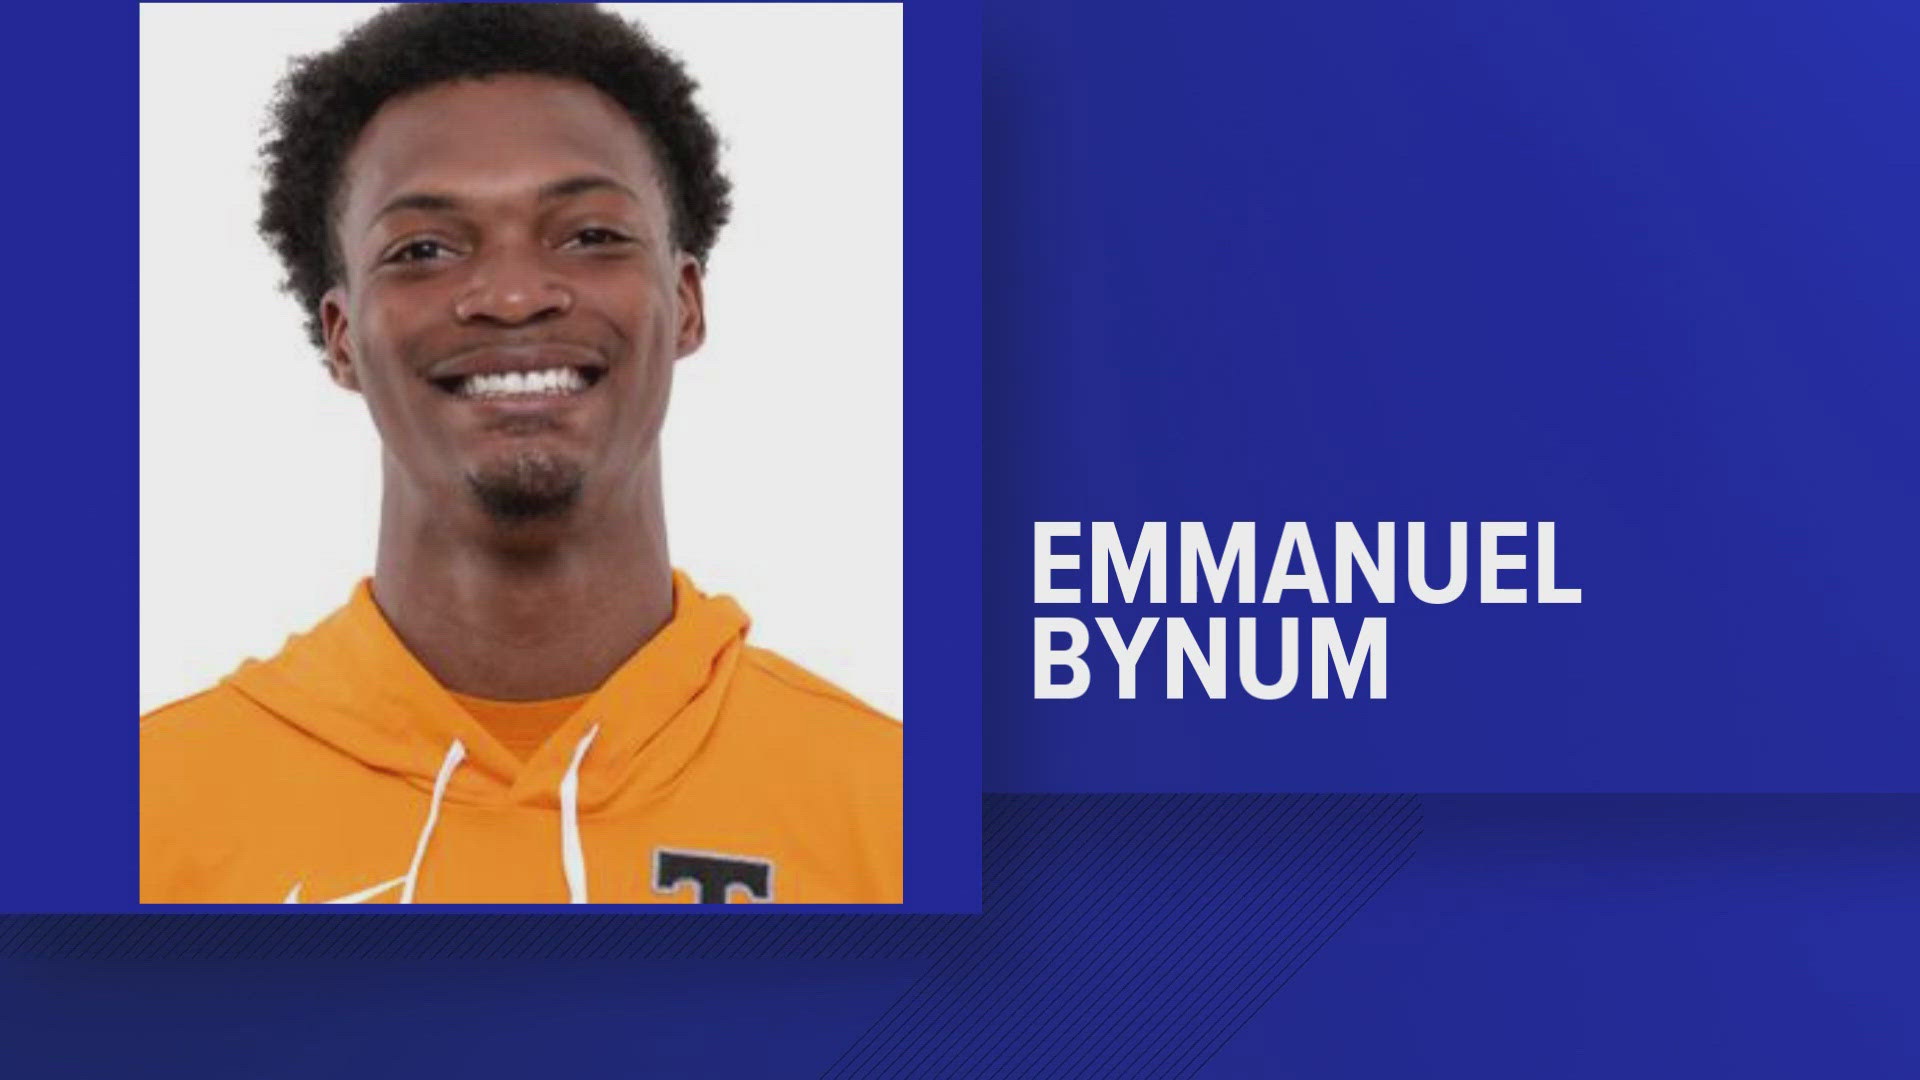 Emmanual Bynum is a senior at the University of Tennessee. He placed 5th in the men's 400m race.